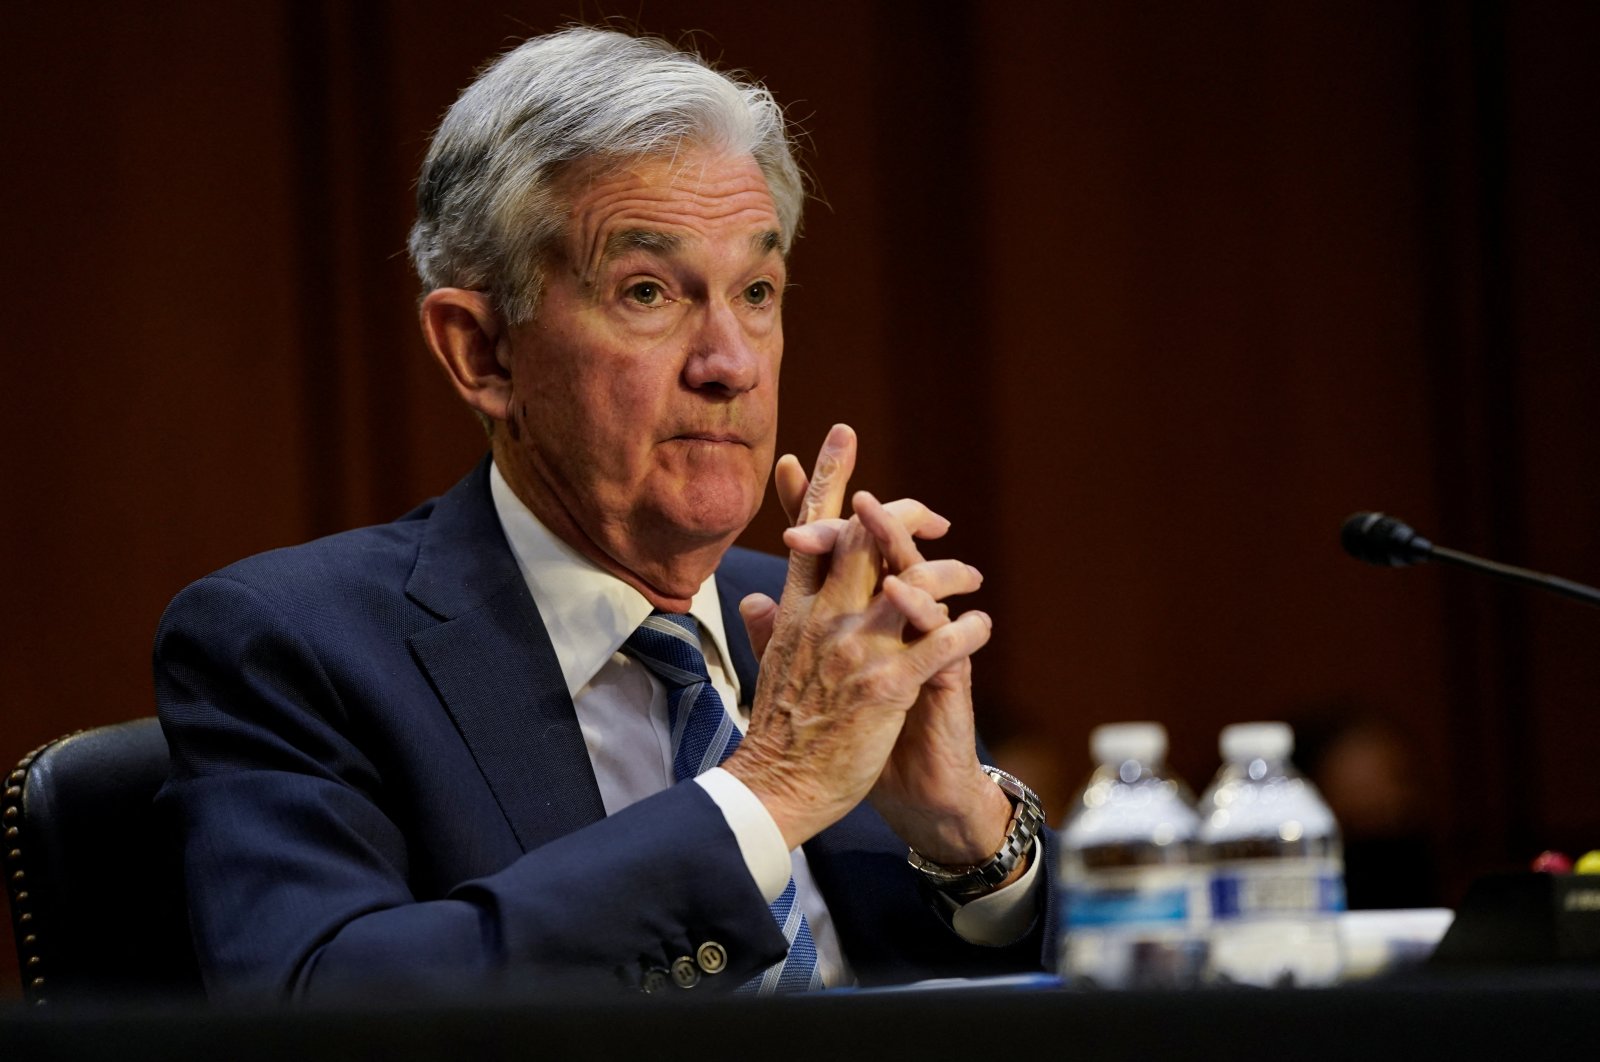 Federal Reserve Chair Jerome Powell reacts as he testifies before a Senate Banking, Housing, and Urban Affairs Committee hearing on the &quot;Semiannual Monetary Policy Report to the Congress&quot;, on Capitol Hill in Washington, D.C., U.S., June 22, 2022. (Reuters Photo)